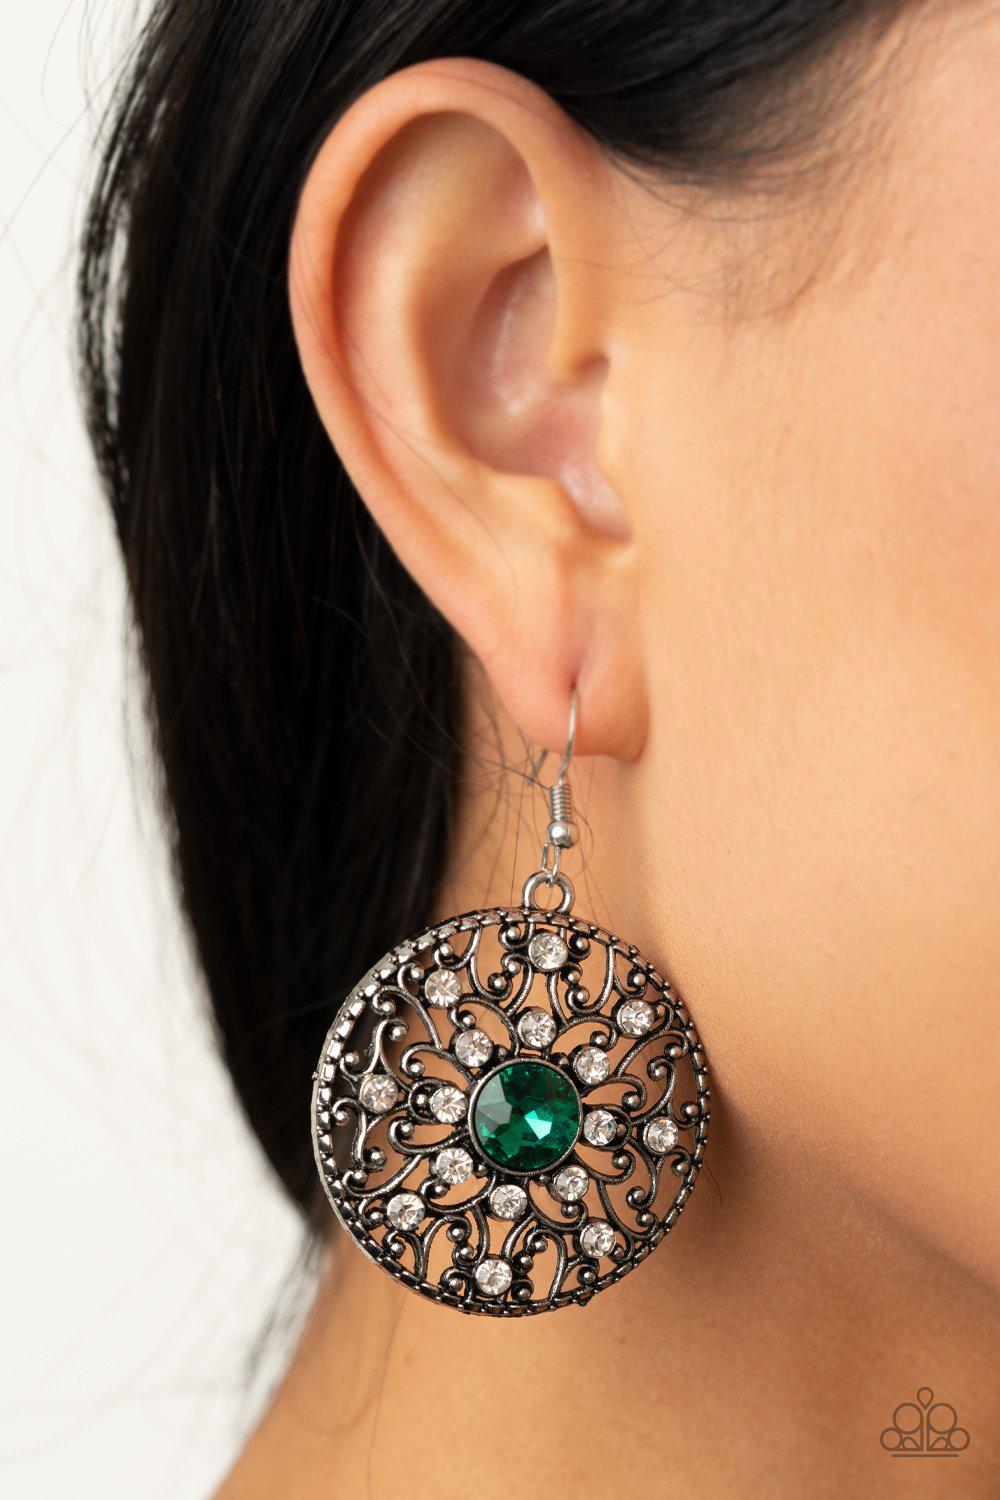 GLOW Your True Colors Green and White Rhinestone Earrings - Paparazzi Accessories - model -CarasShop.com - $5 Jewelry by Cara Jewels